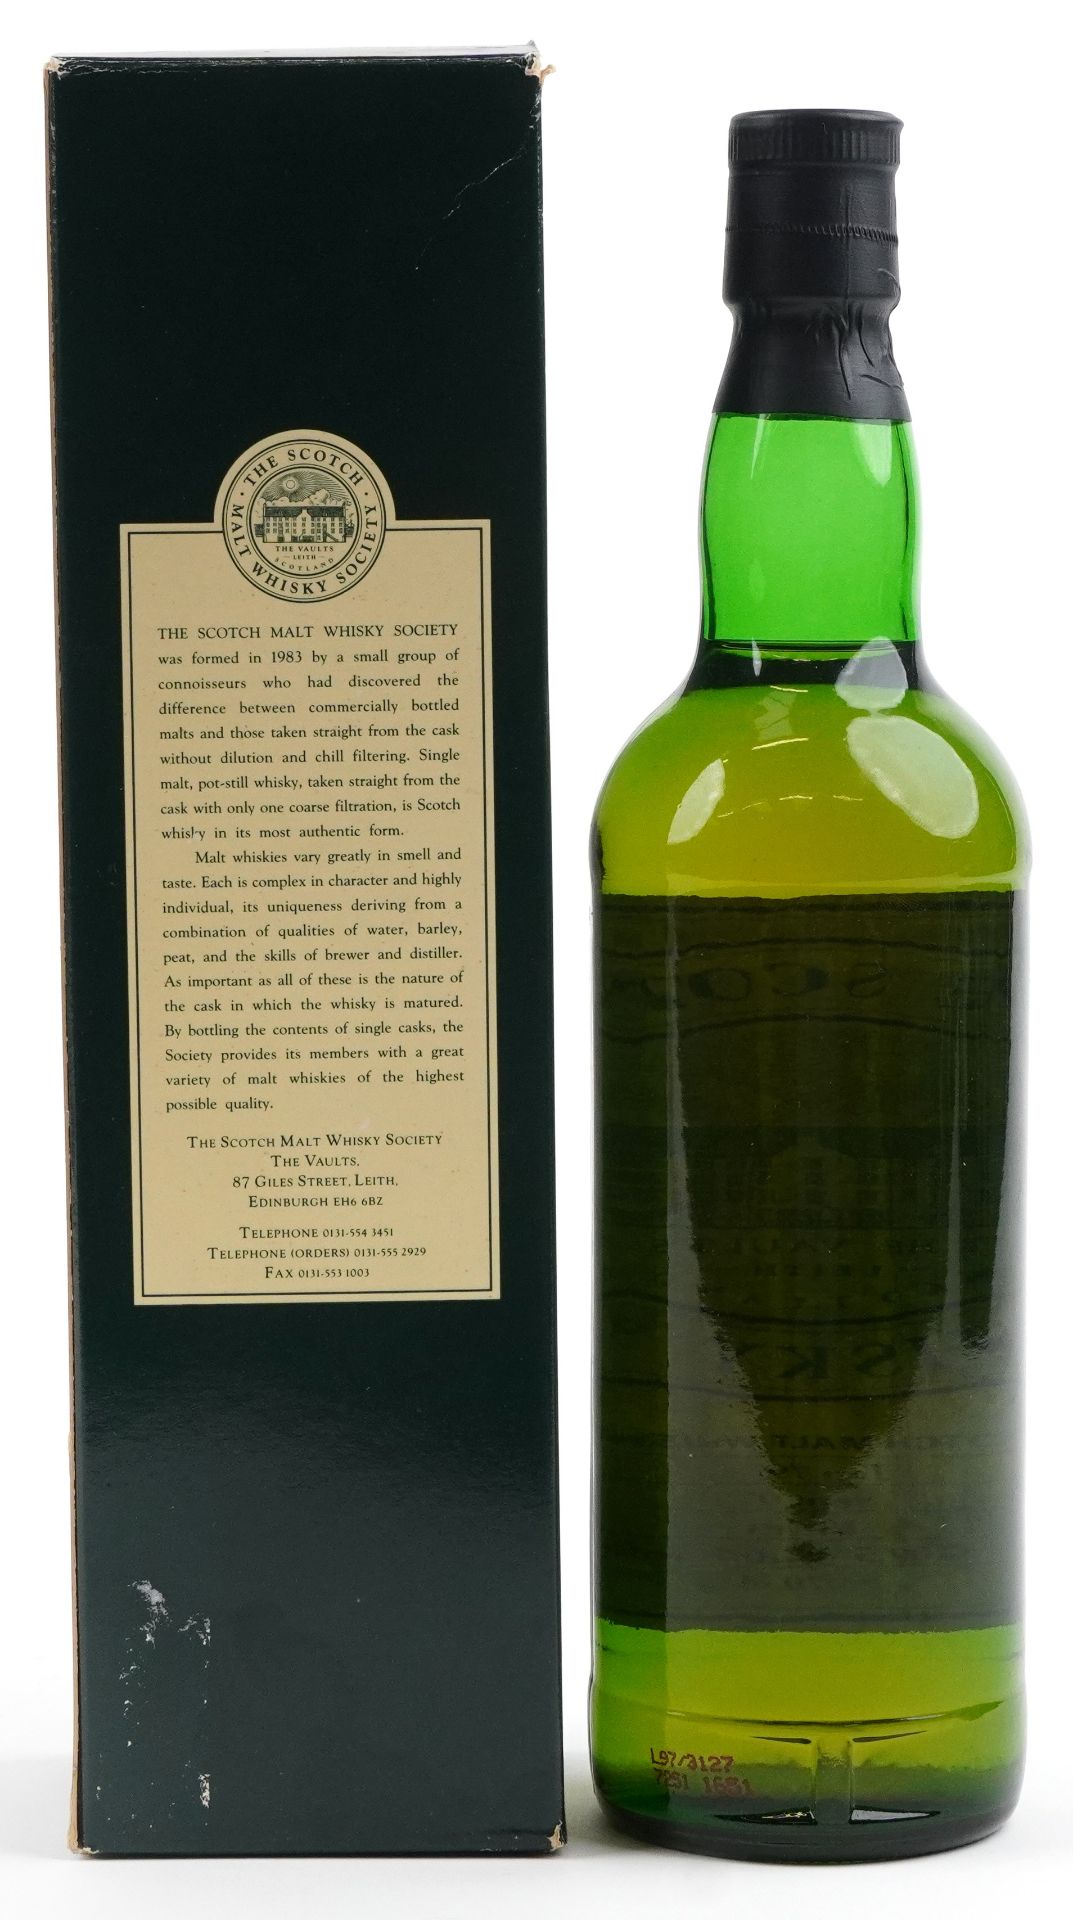 Bottle of Scotch Malt Whisky Society Single Cask 18 years old whisky with box, Society cask no 55.8, - Image 2 of 4